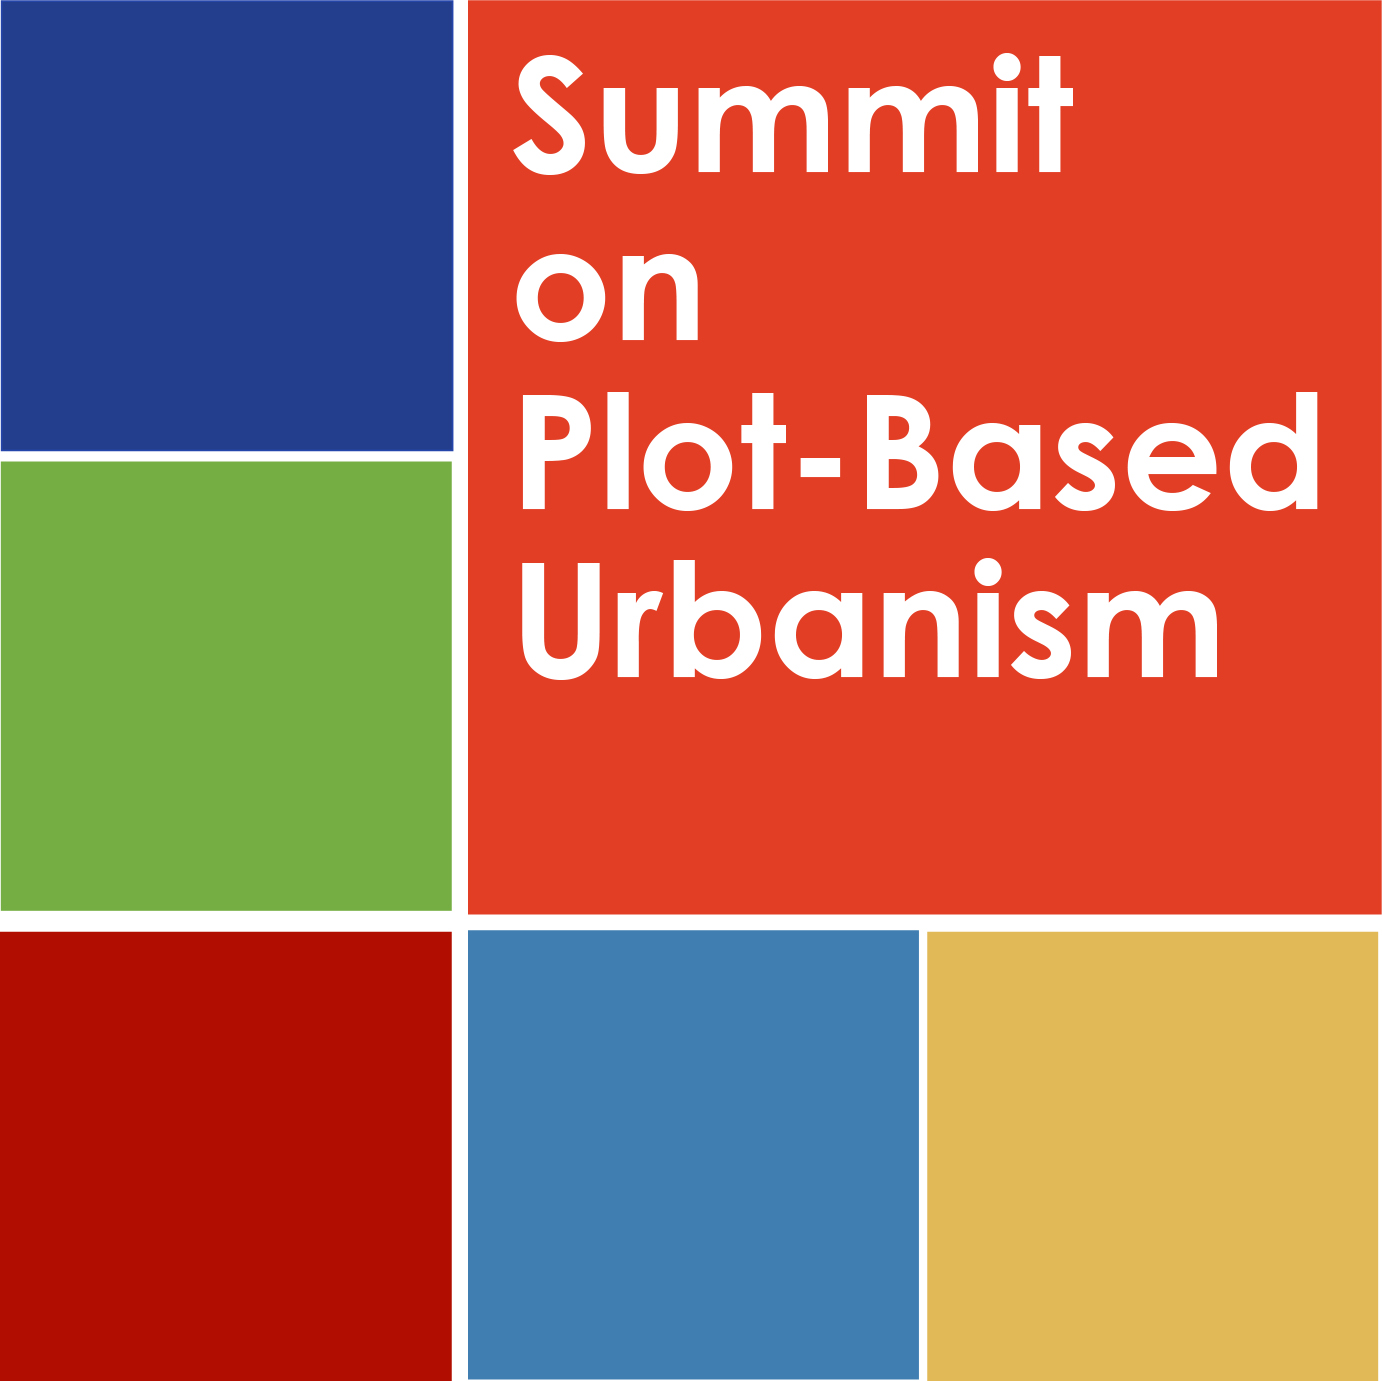 More from the Summit on Plot-Based Urbanism